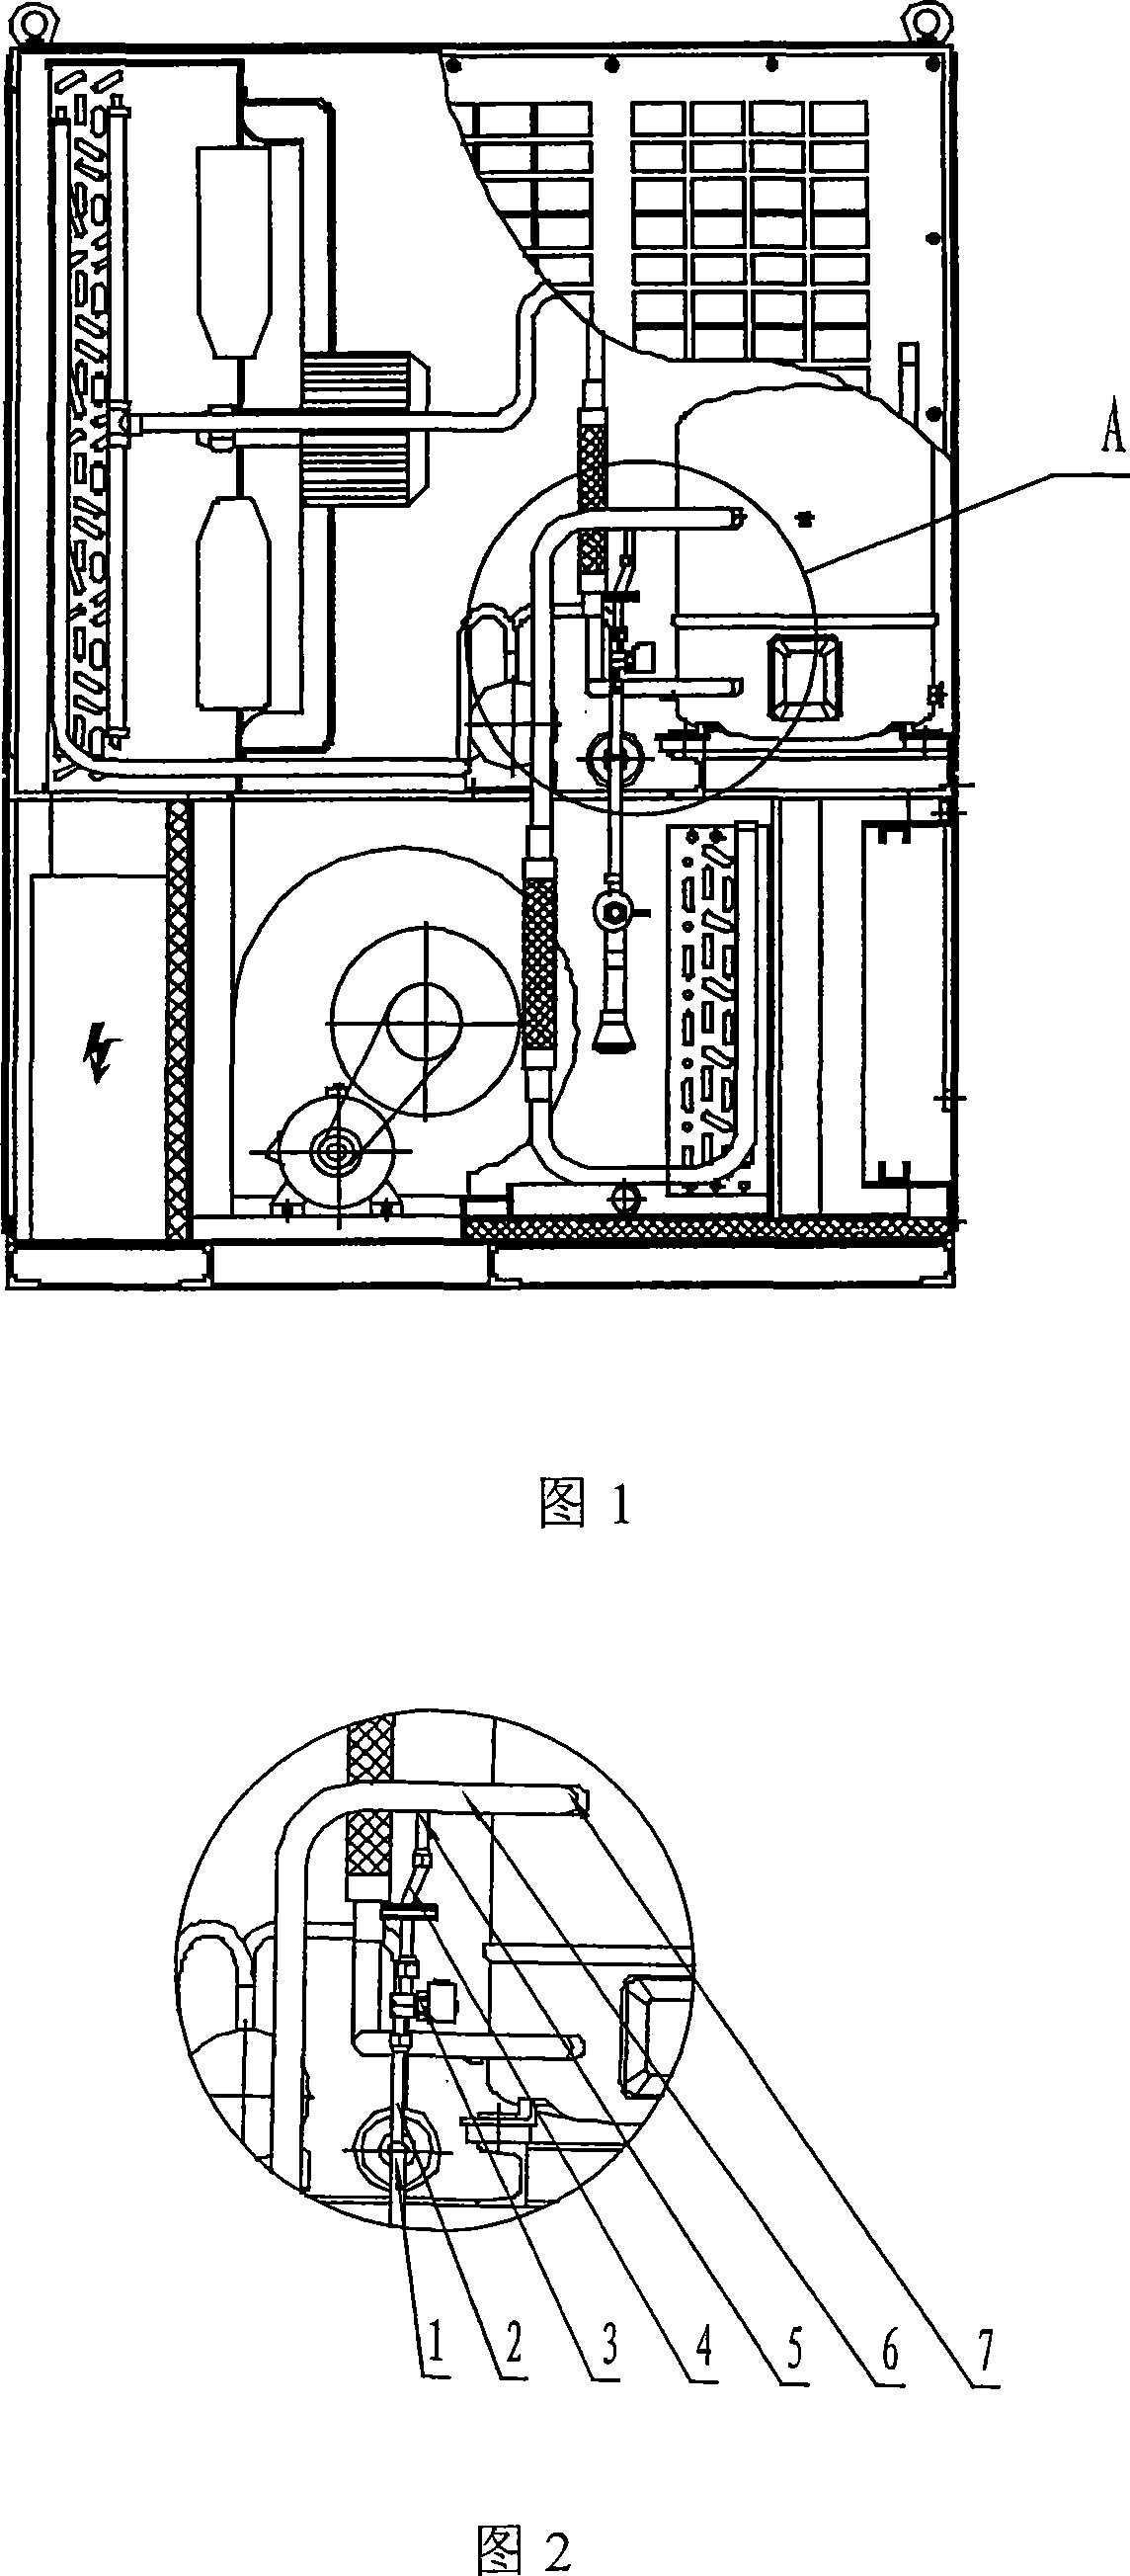 Hydrojet device of high-temperature air conditioner refrigeration system